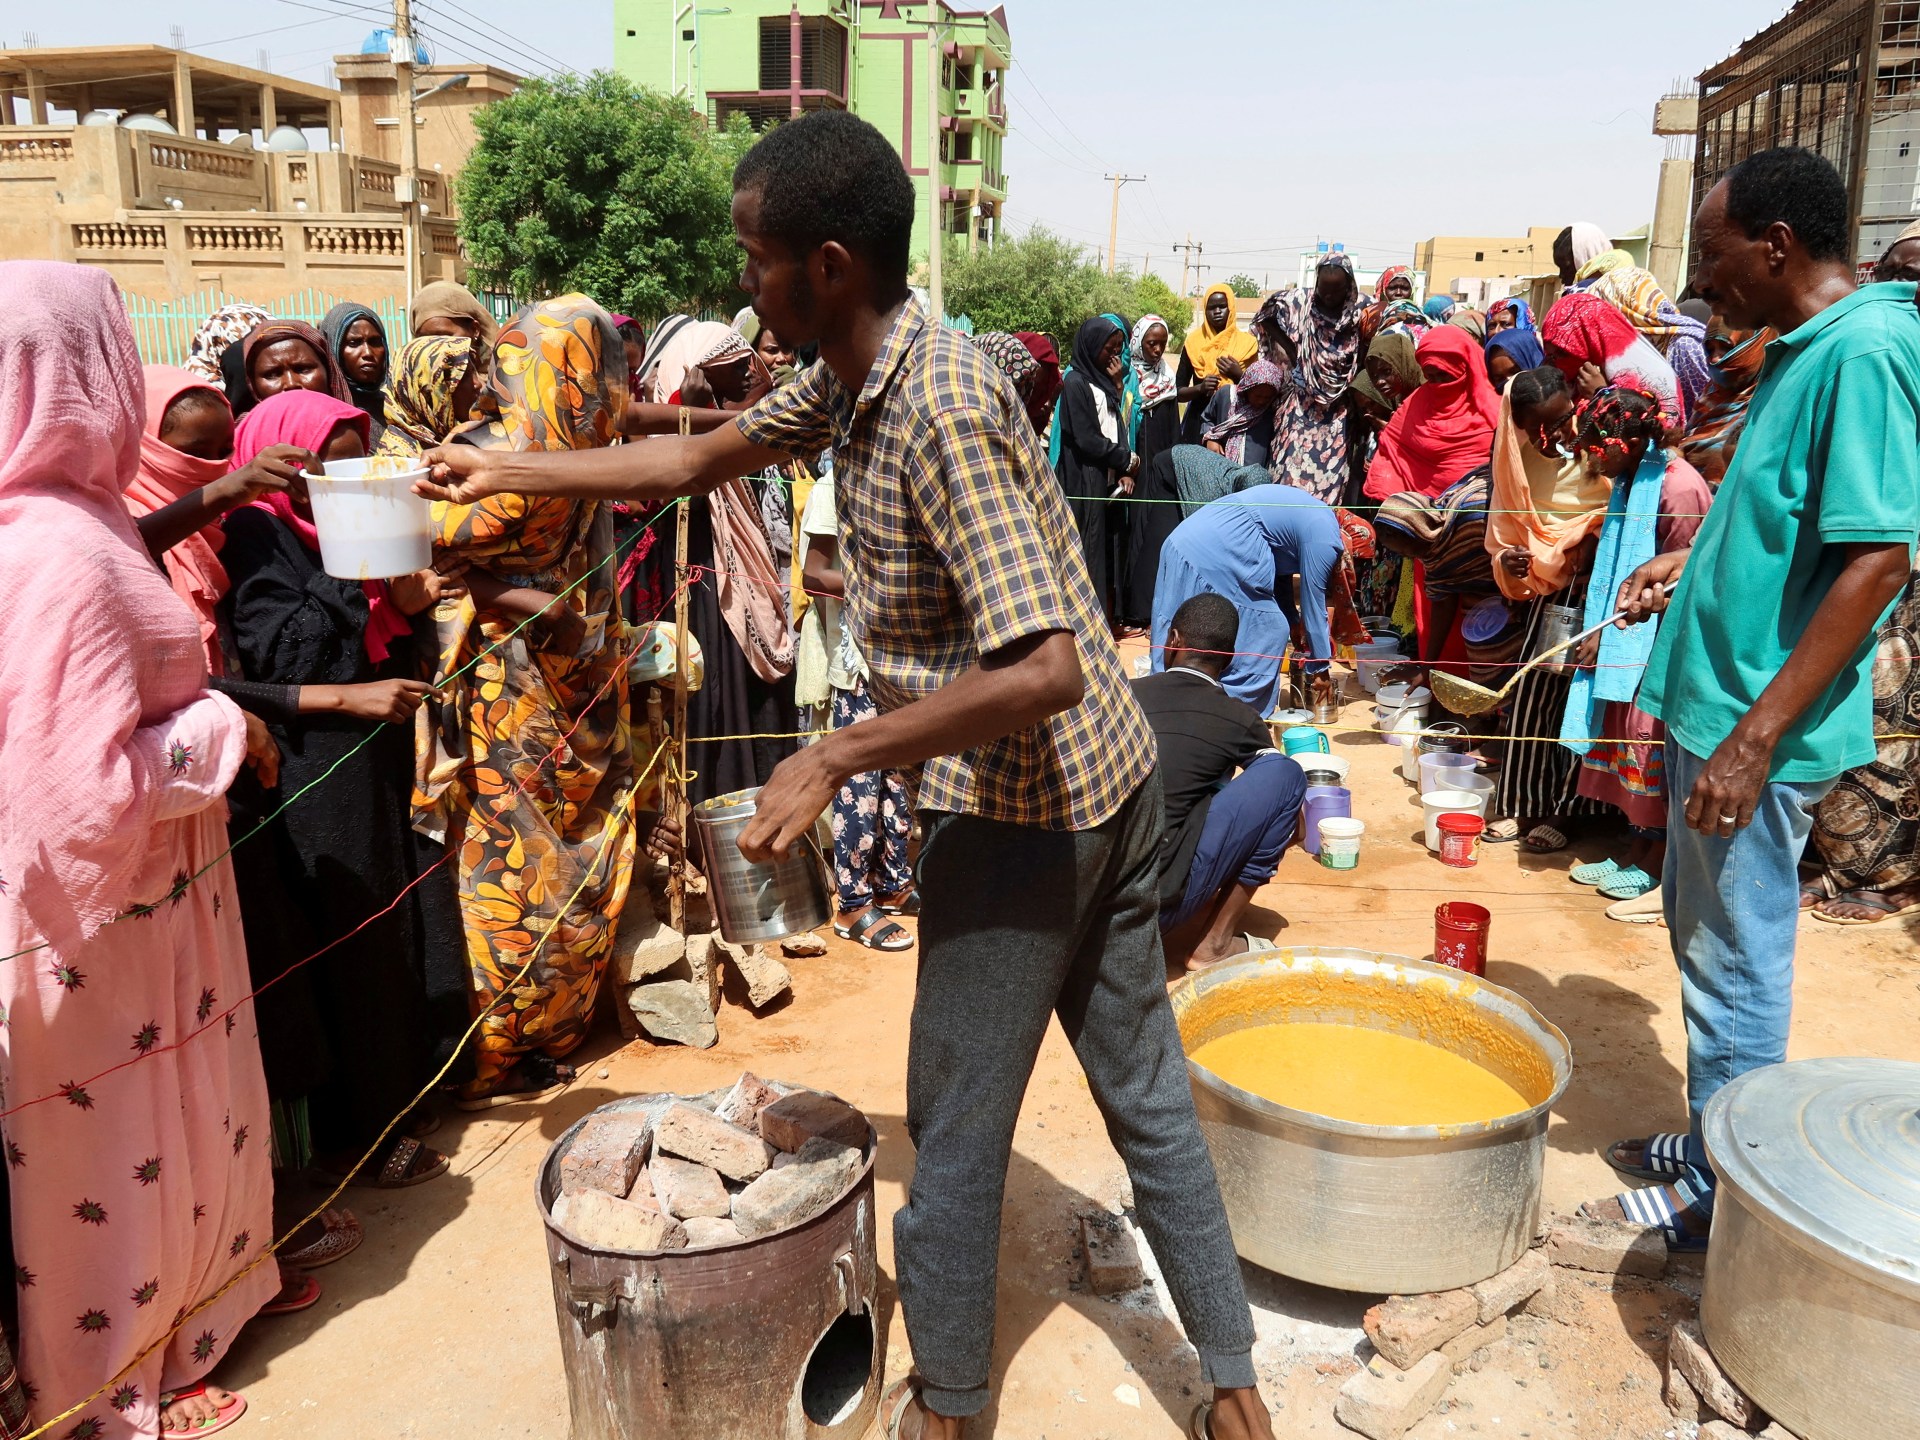 Are Sudan’s civil society activists being targeted by both warring sides? | Features News